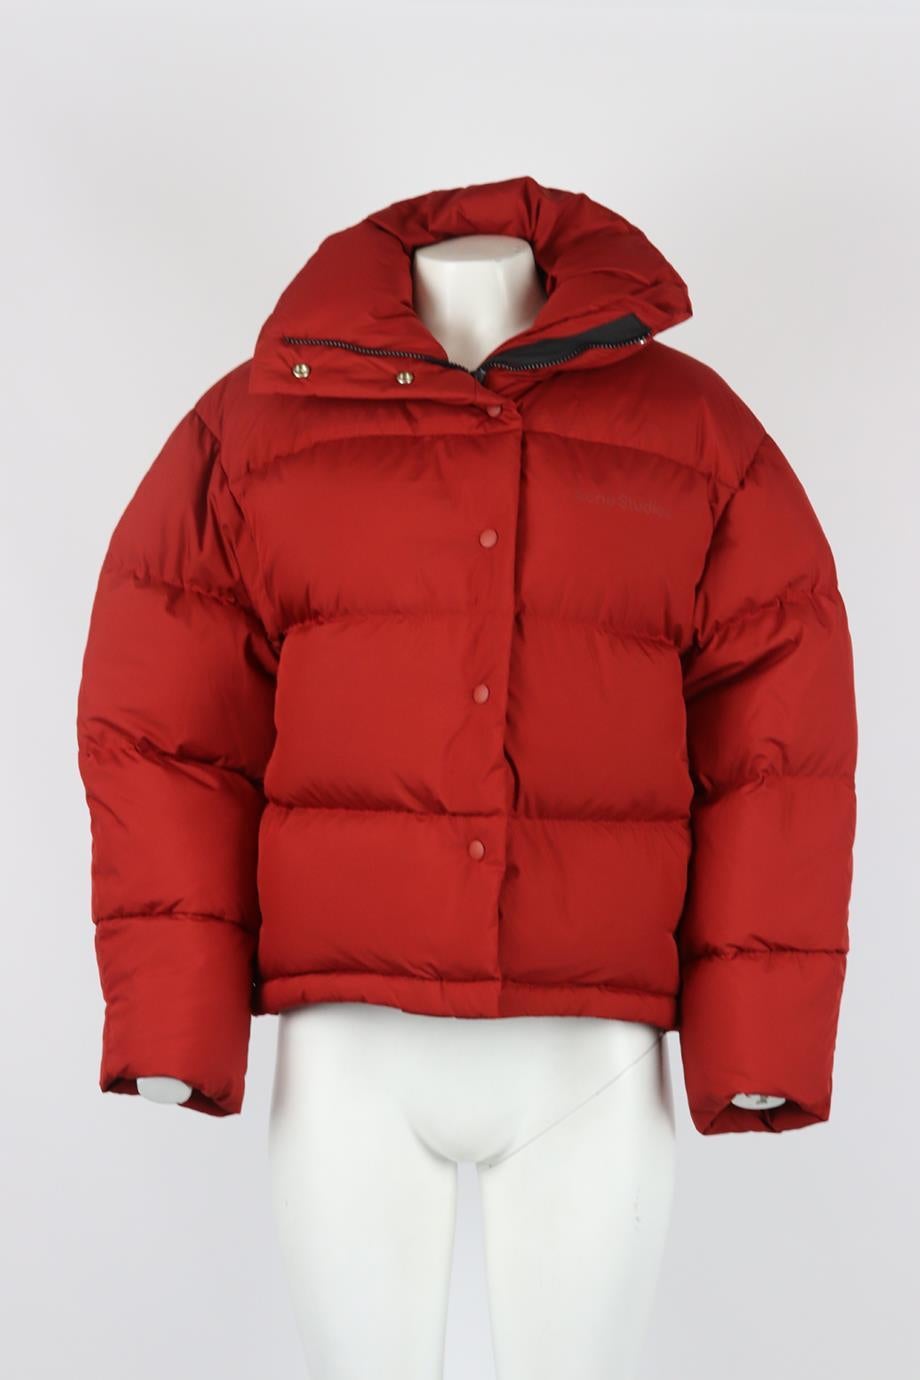 Acne Studios quilted shell down jacket. Red. Long sleeve, turtleneck. Zip fastening at the front. 100% Polyester; lining: 100% nylon; padding: 90% duck down, 10% duck feathers. Size: XSmall (UK 6, US 2, FR 34, IT 38). Shoulder to shoulder: 20.5 in.